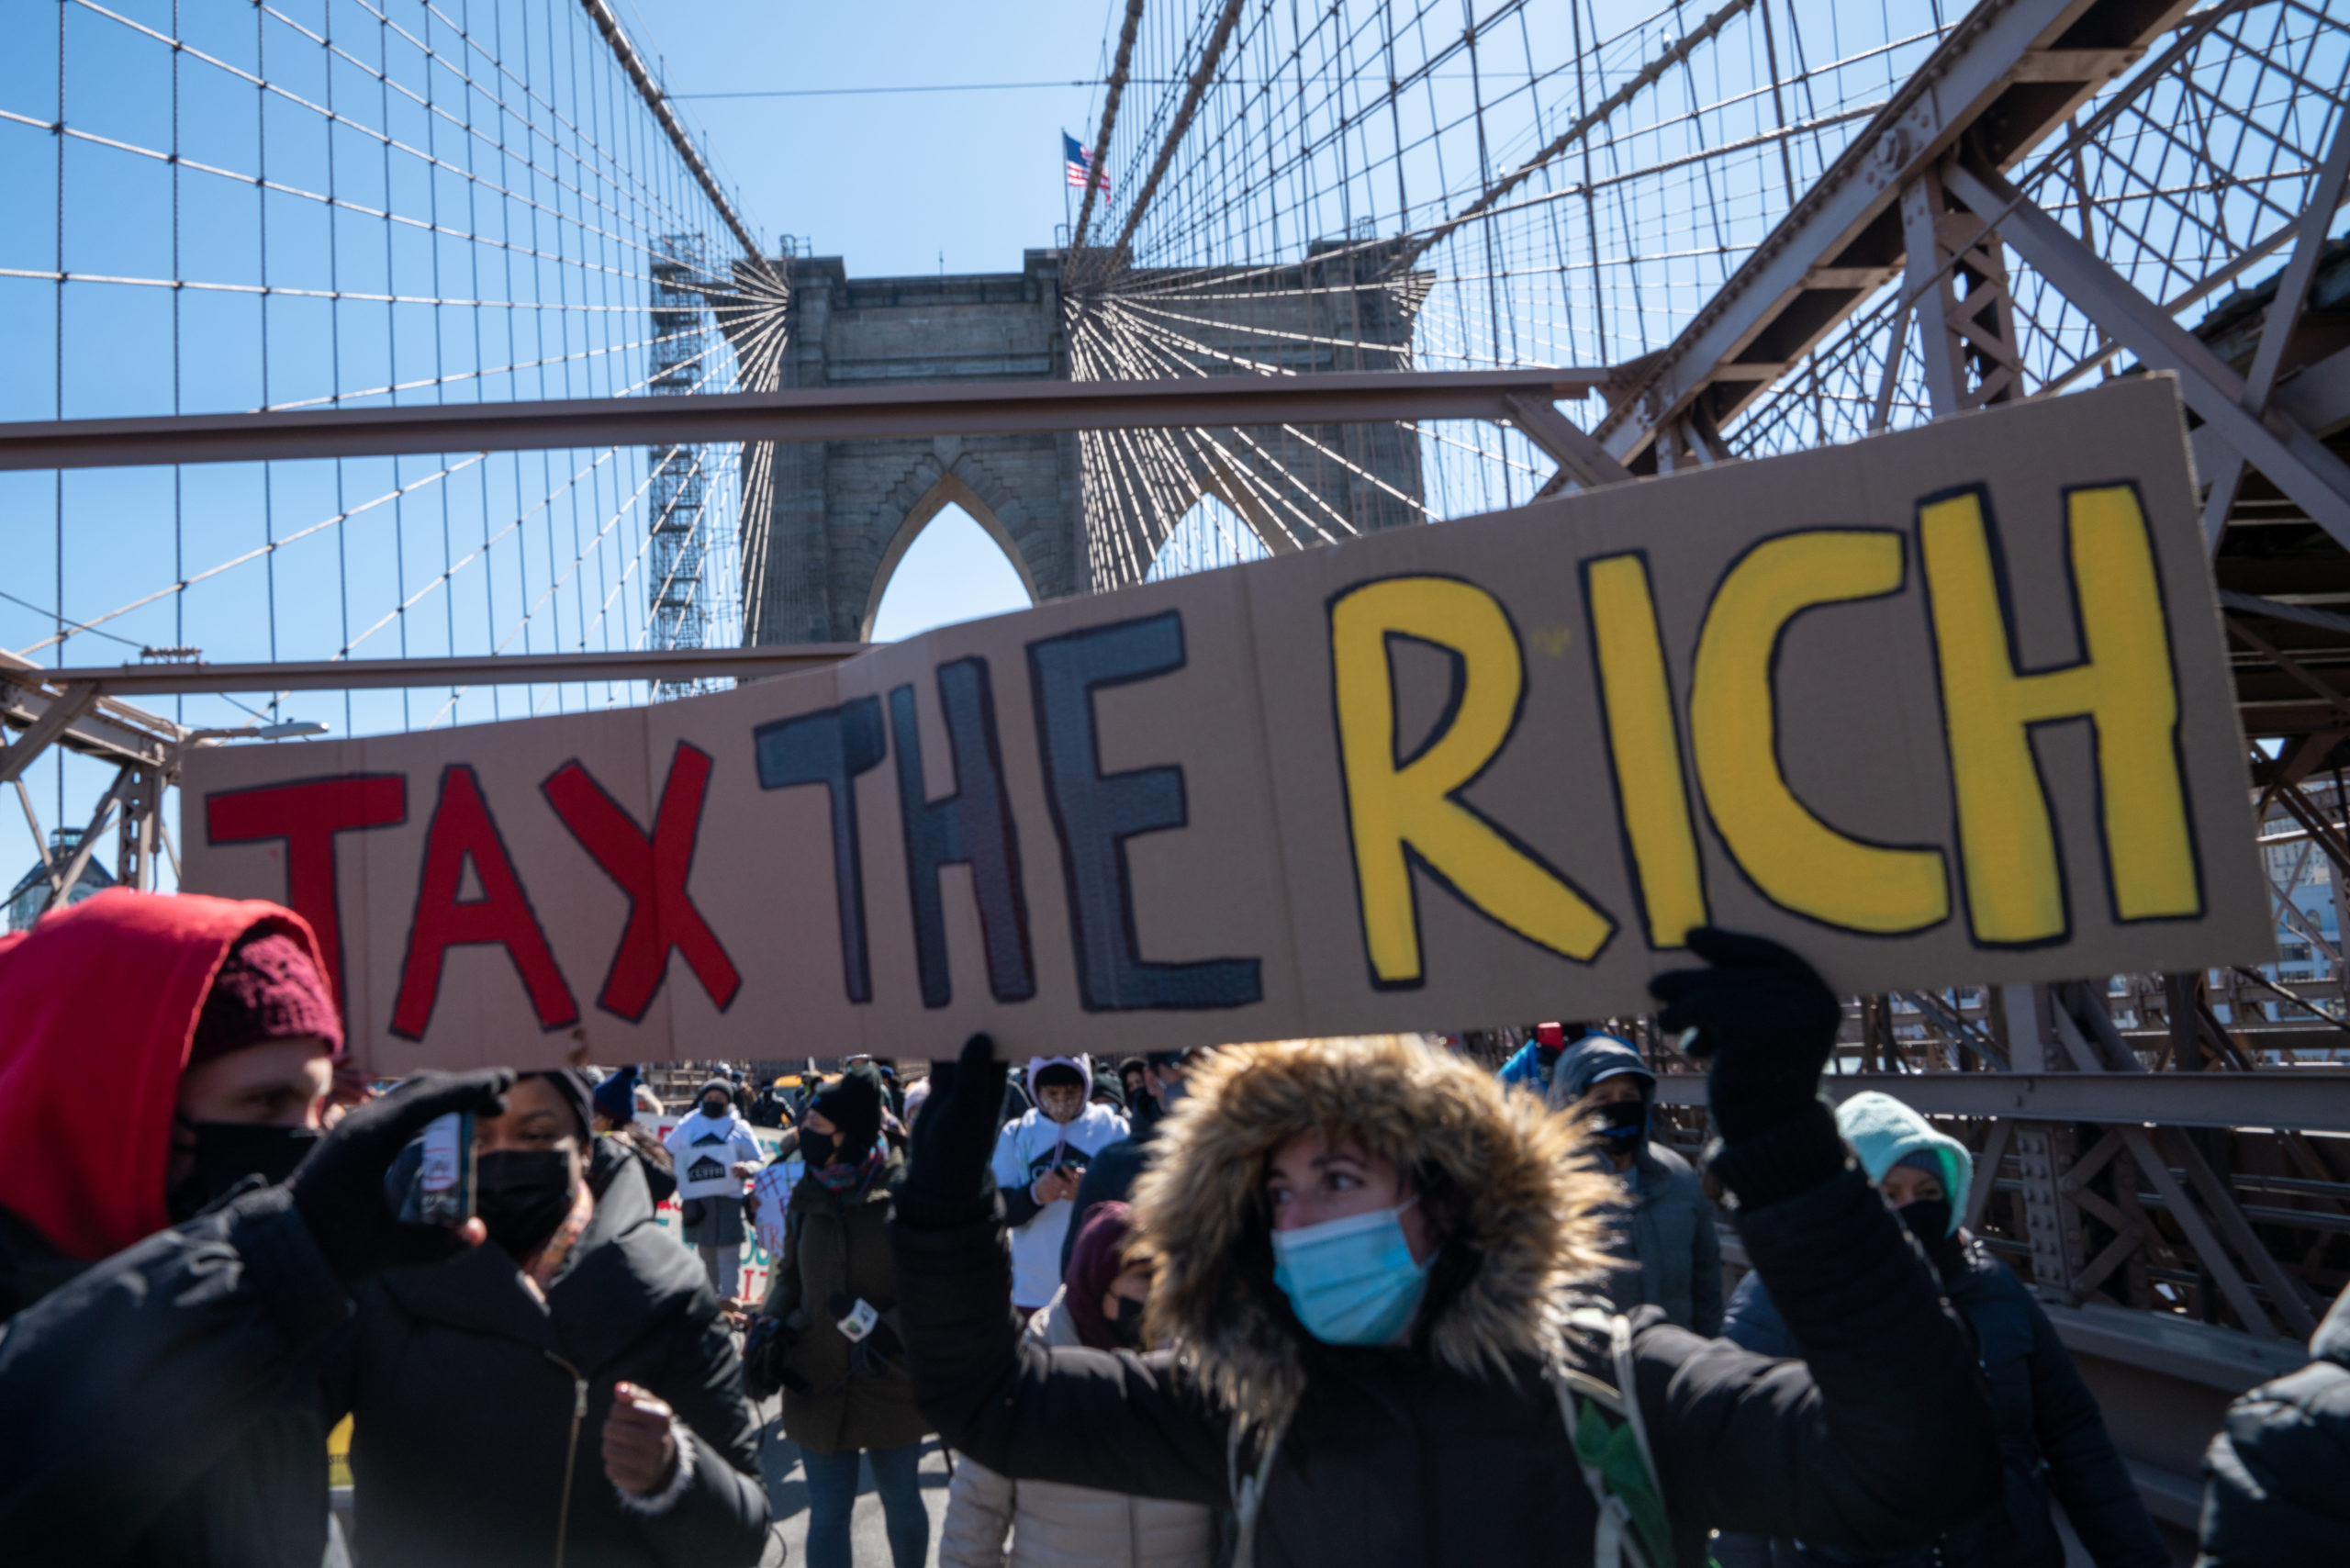 Protestors march across the Brooklyn Bridge holding a sign to "tax the rich" in March. (David Dee Delgado/Getty Images)